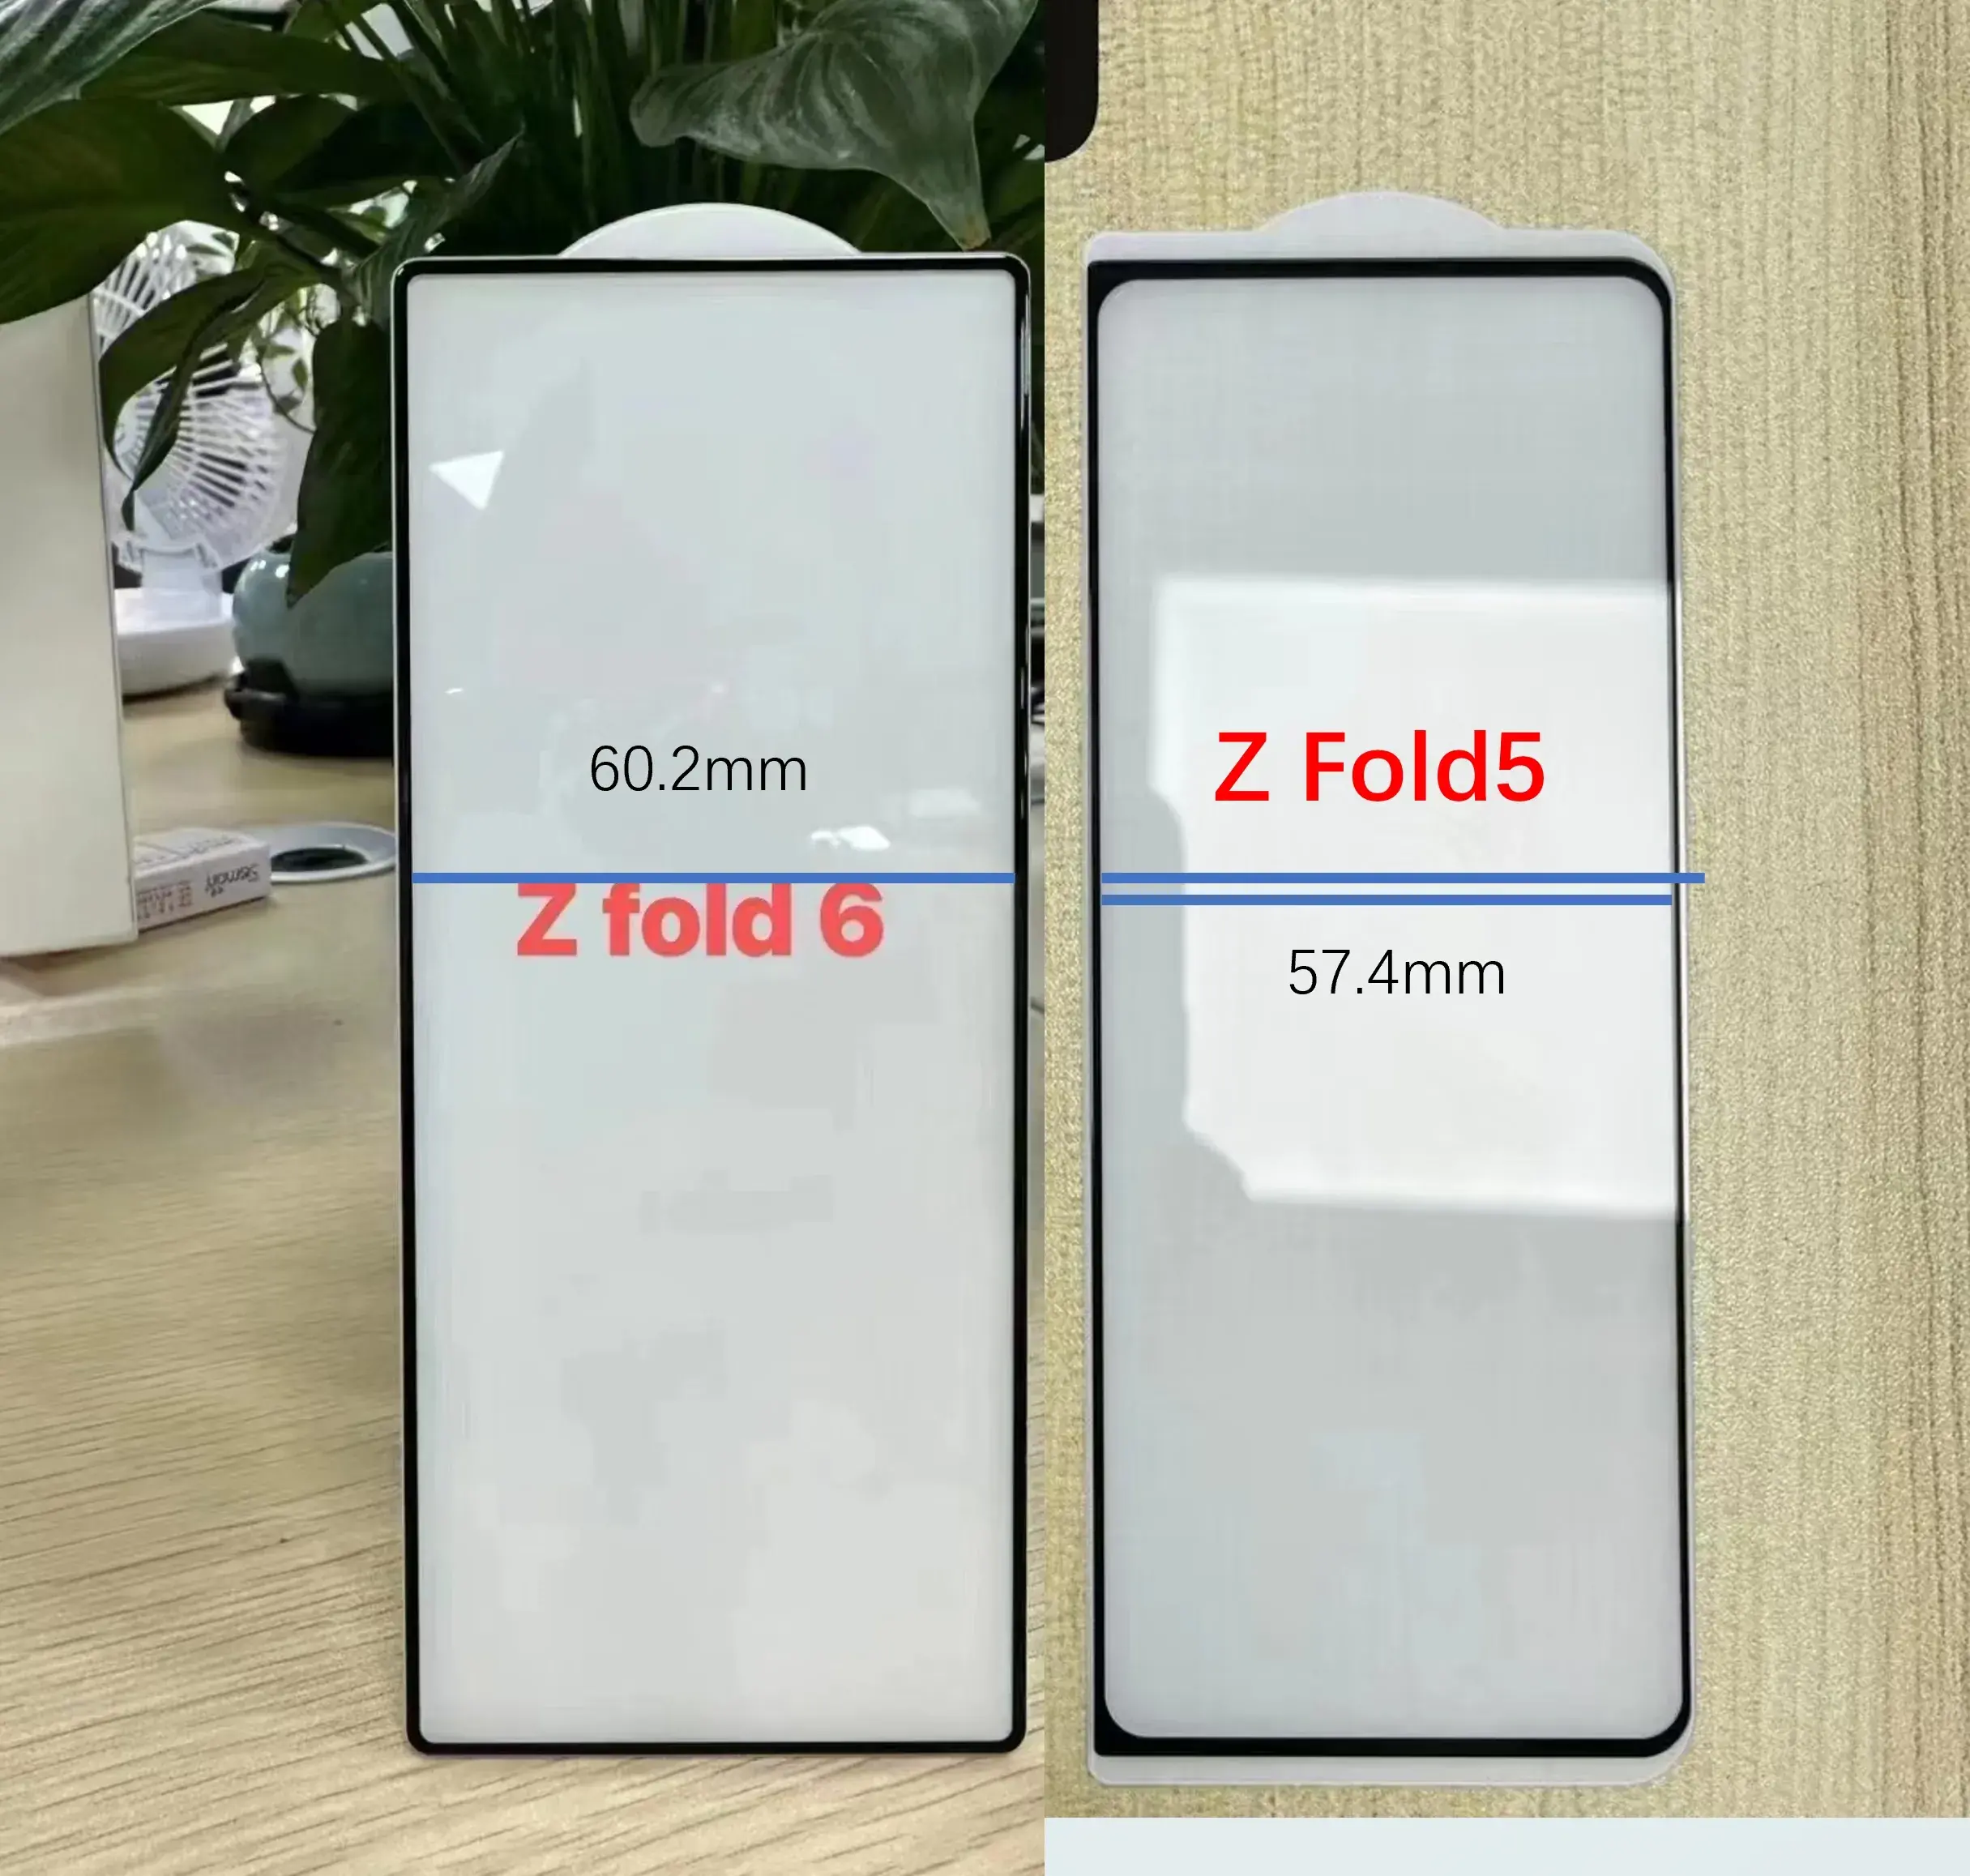 Galaxy Z Fold 6 screen protector leak shows a tad wider, but still very narrow cover display